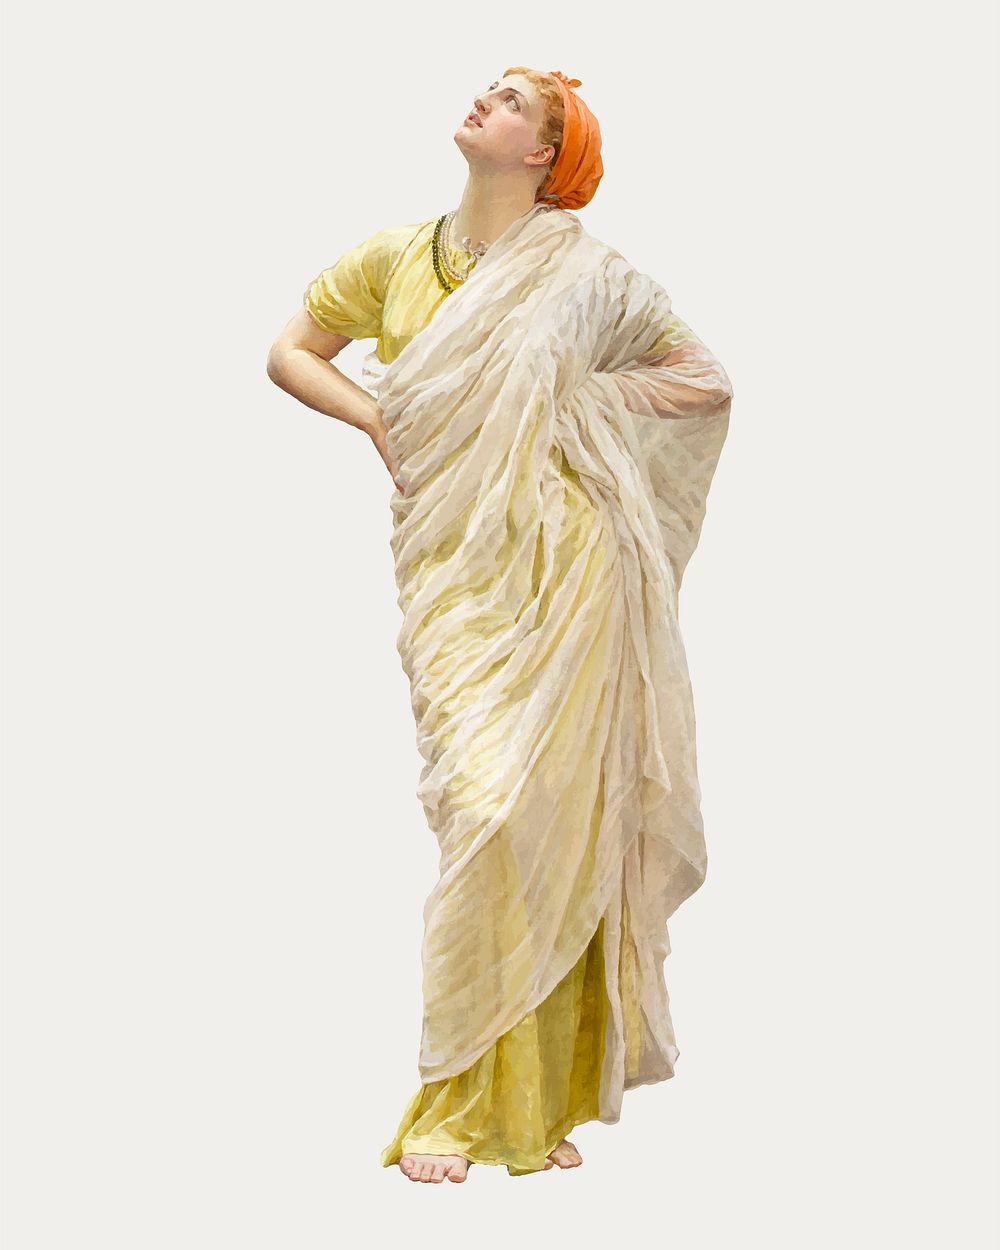 Vintage woman in yellow dress sticker vector, remixed from the artworks by Albert Joseph Moore